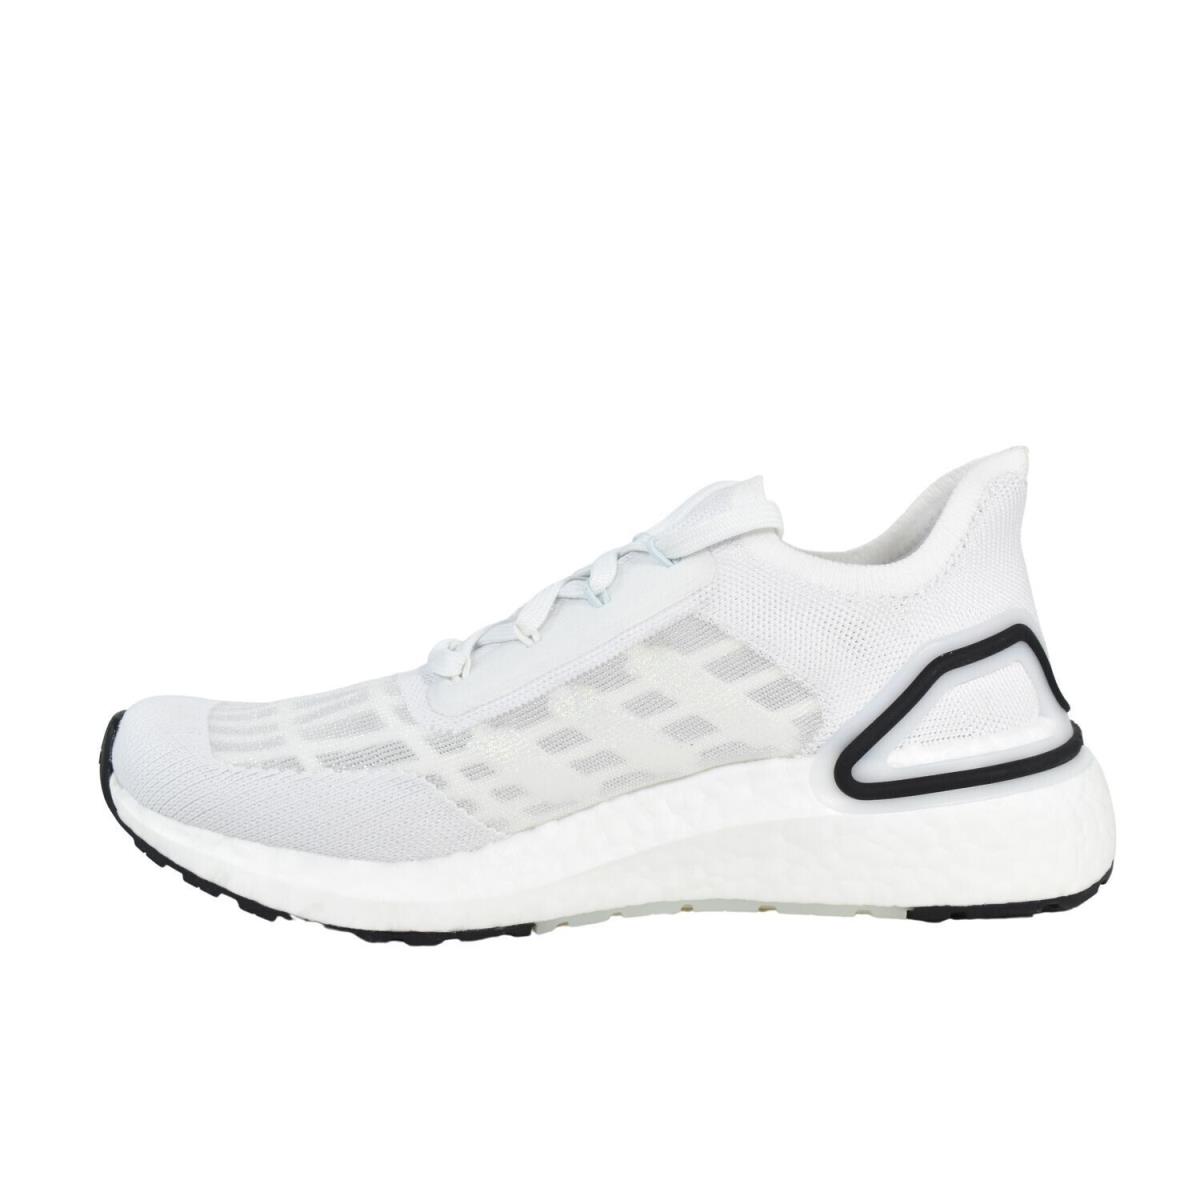 Adidas shoes UltraBoost - White 0